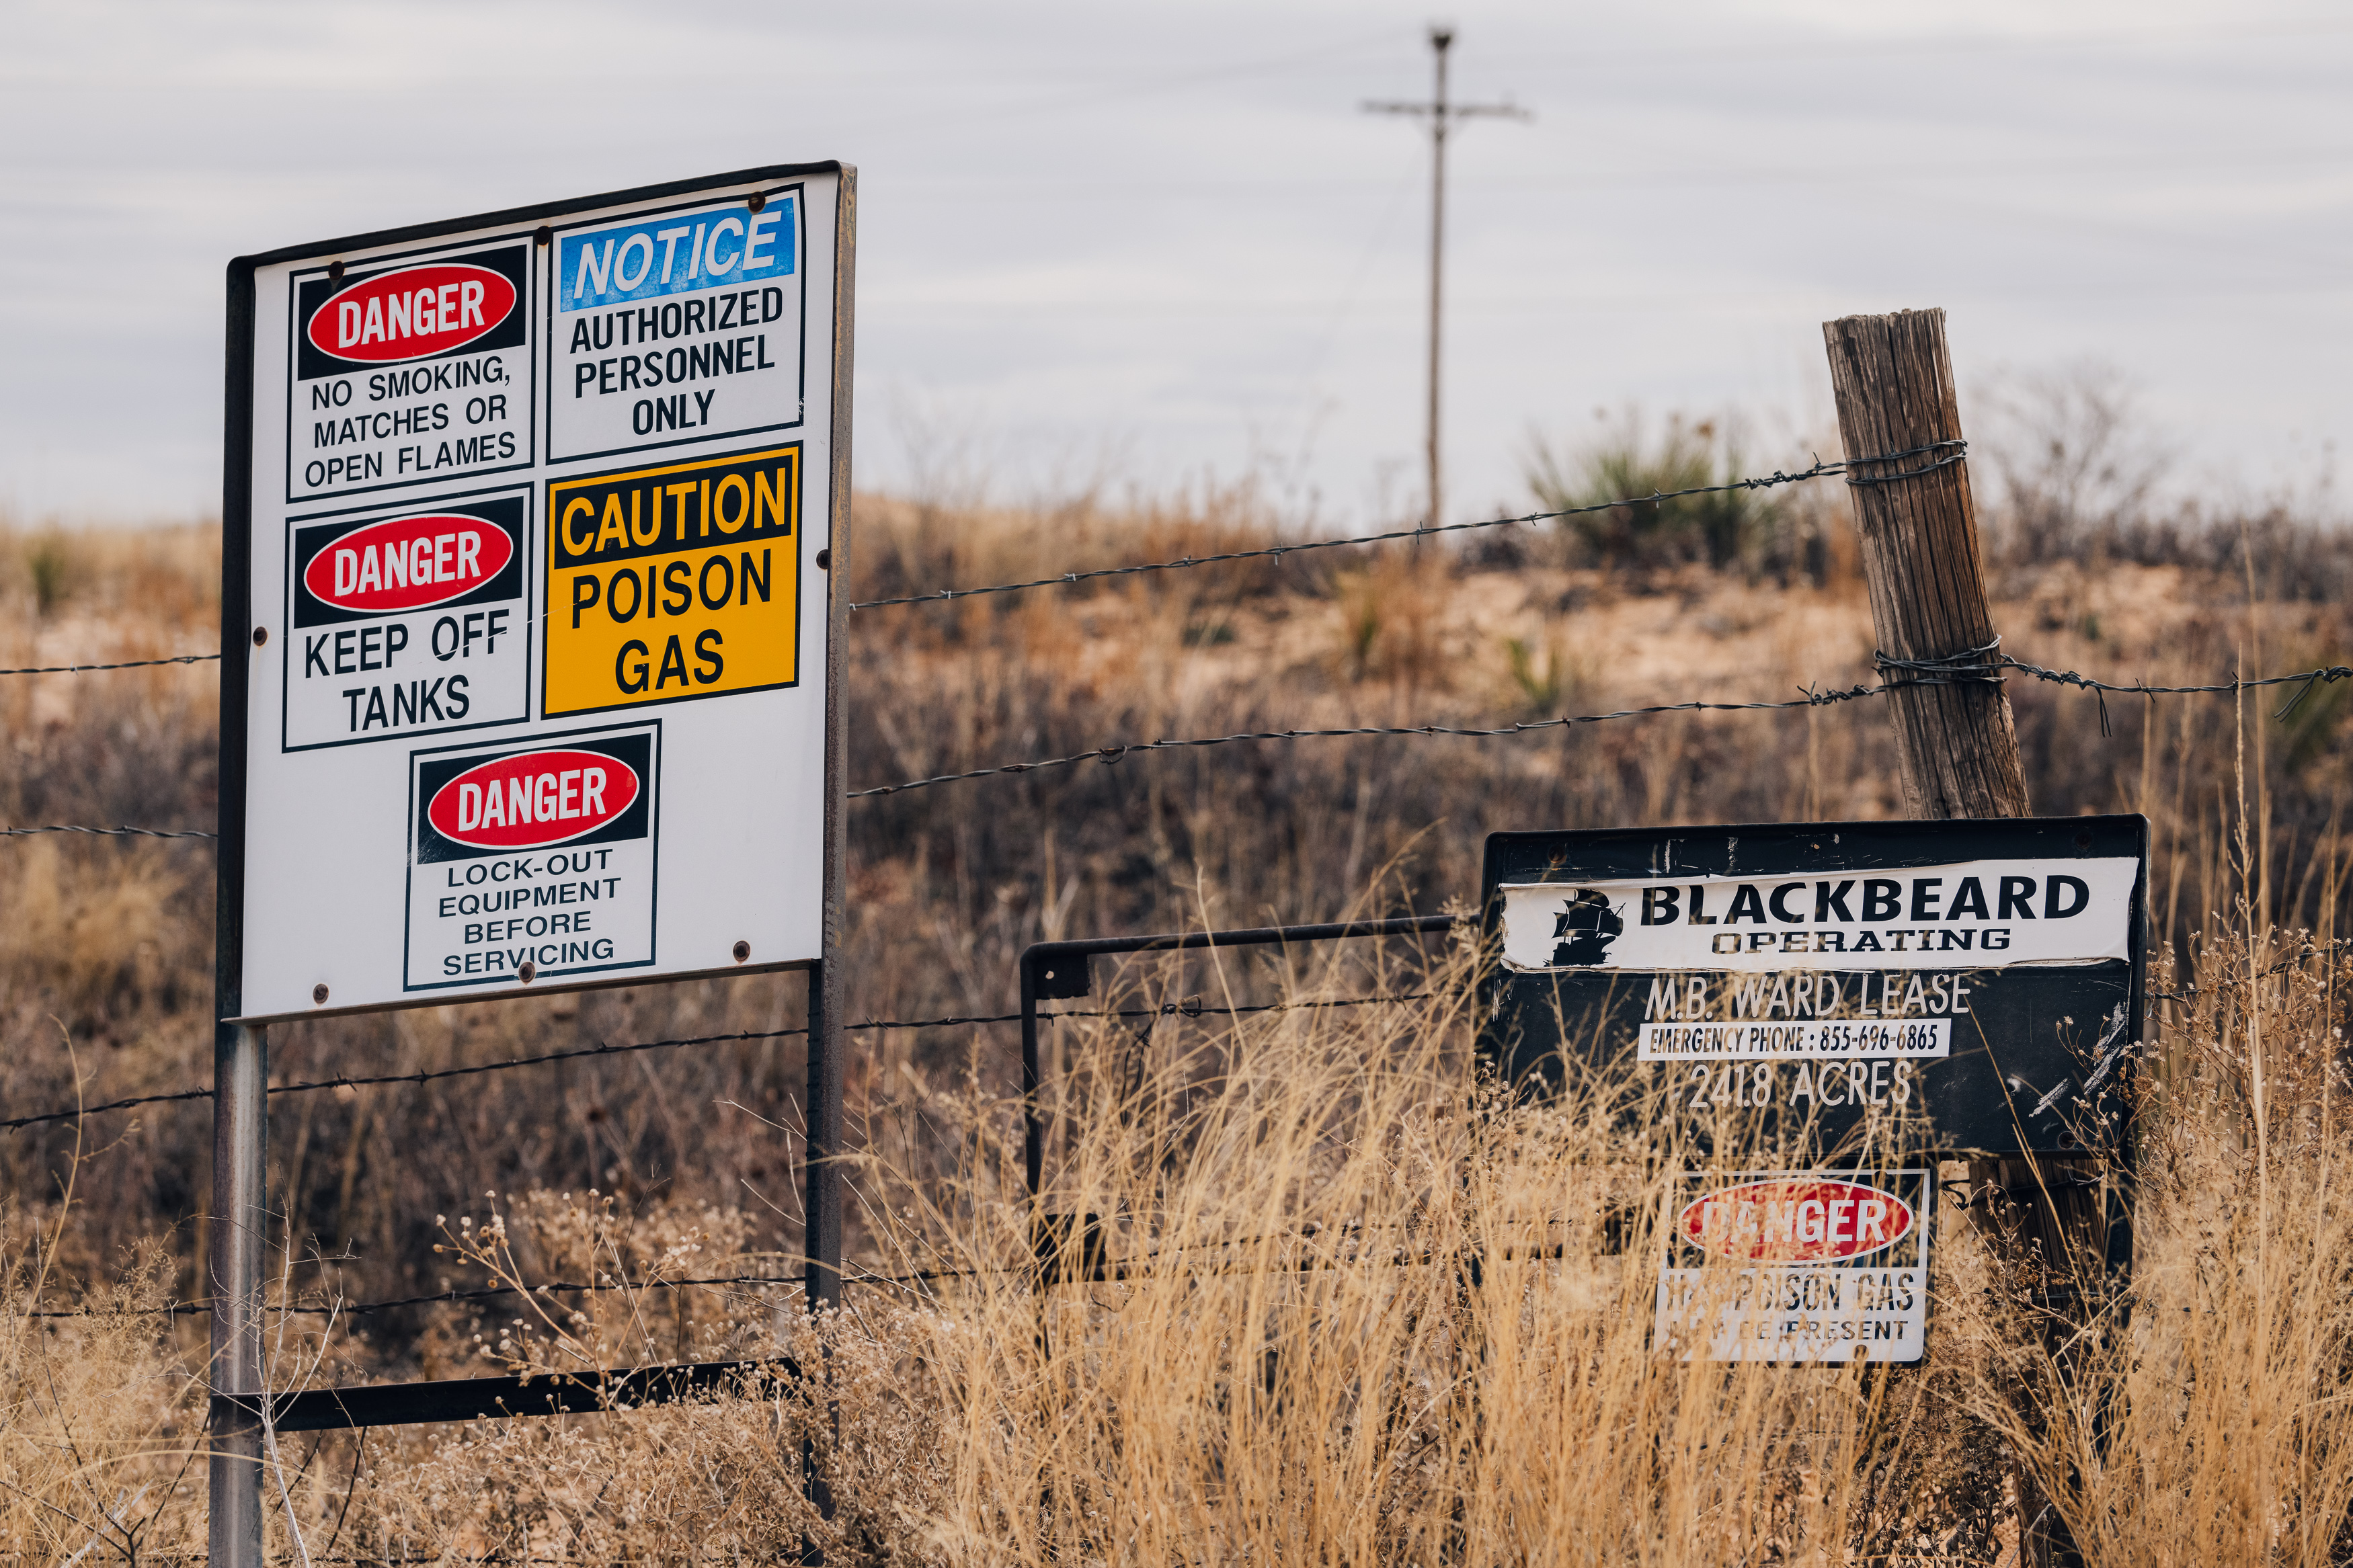 Signs warning of poison gas in Winkler County, Texas.